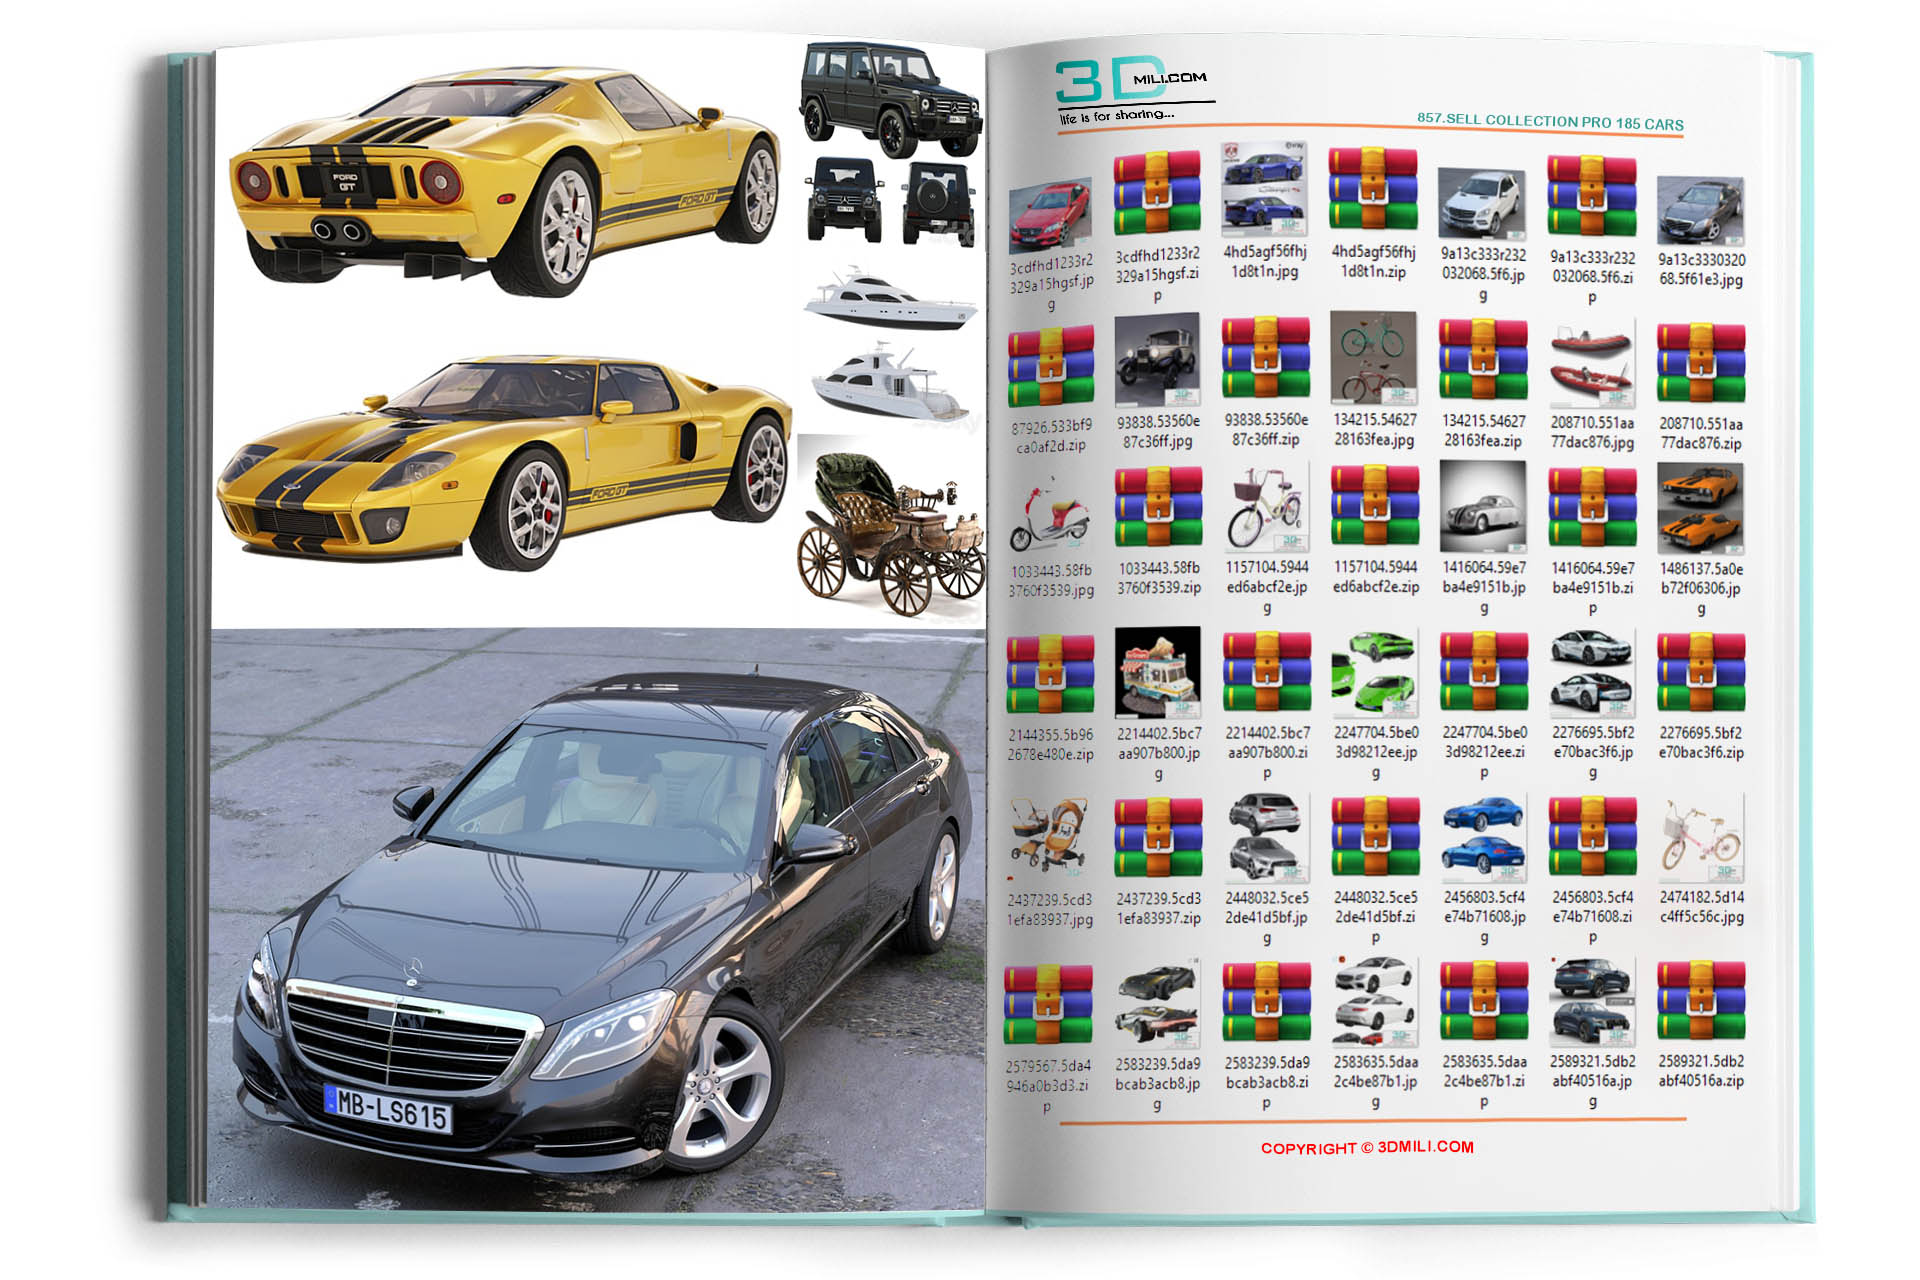 https://shop3dmili.com/853-sell-collection-pro-185-cars